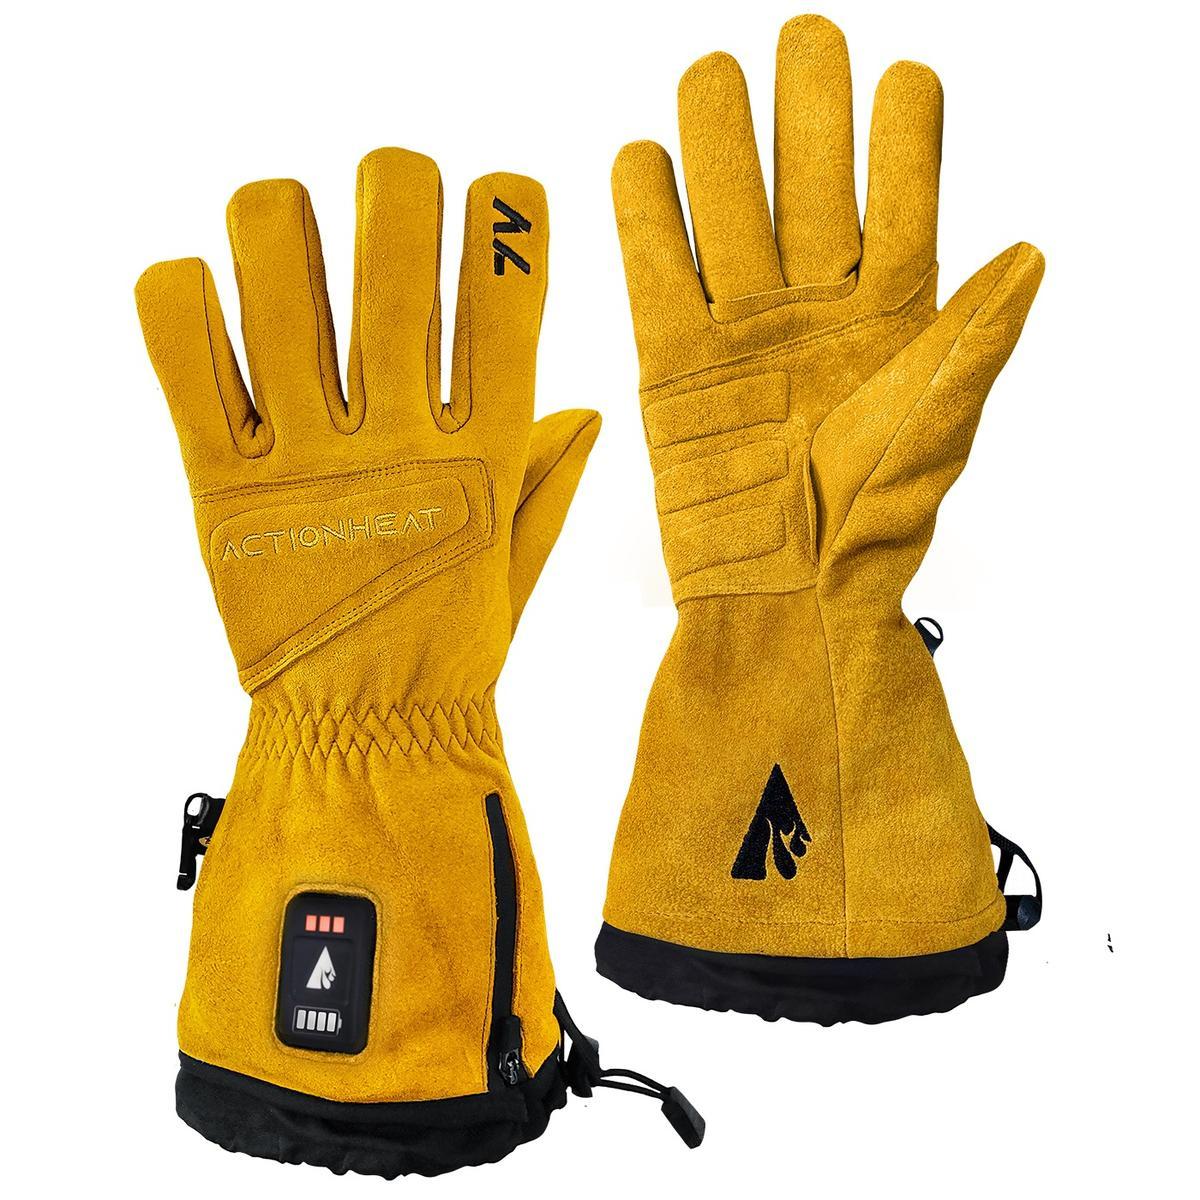 Open Box ActionHeat 7V Rugged Leather Heated Work Gloves - Heated